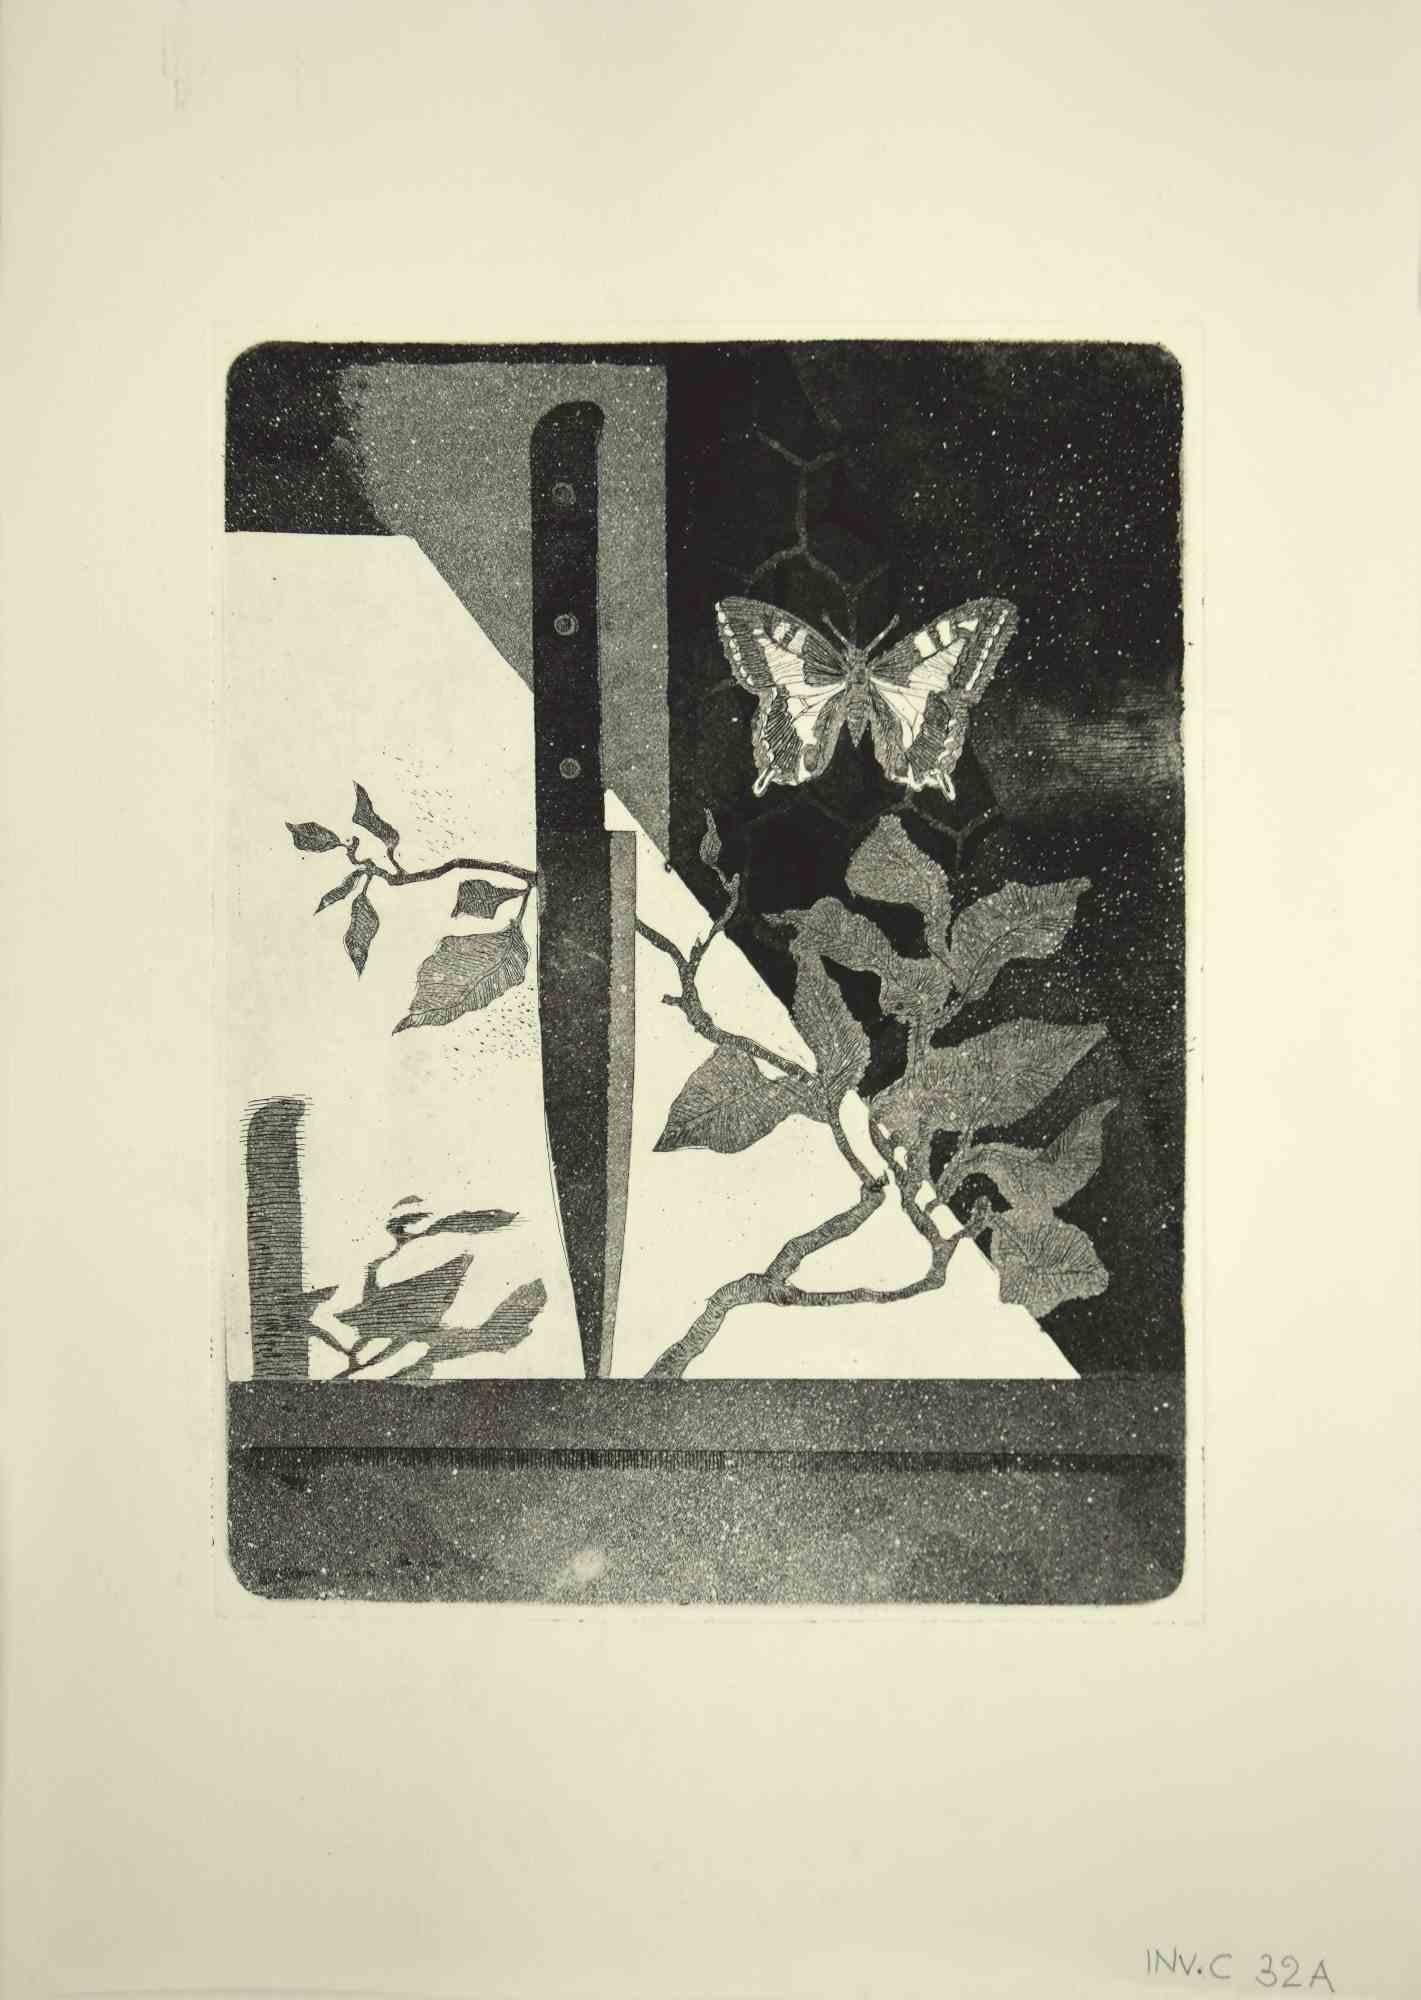 The knife and butterfly is an original etching print realized by Leo Guida in the 1970s.

Good condition.

Leo Guida  (1992 - 2017). Sensitive to current issues, artistic movements and historical techniques, Leo Guida has been able to weave with